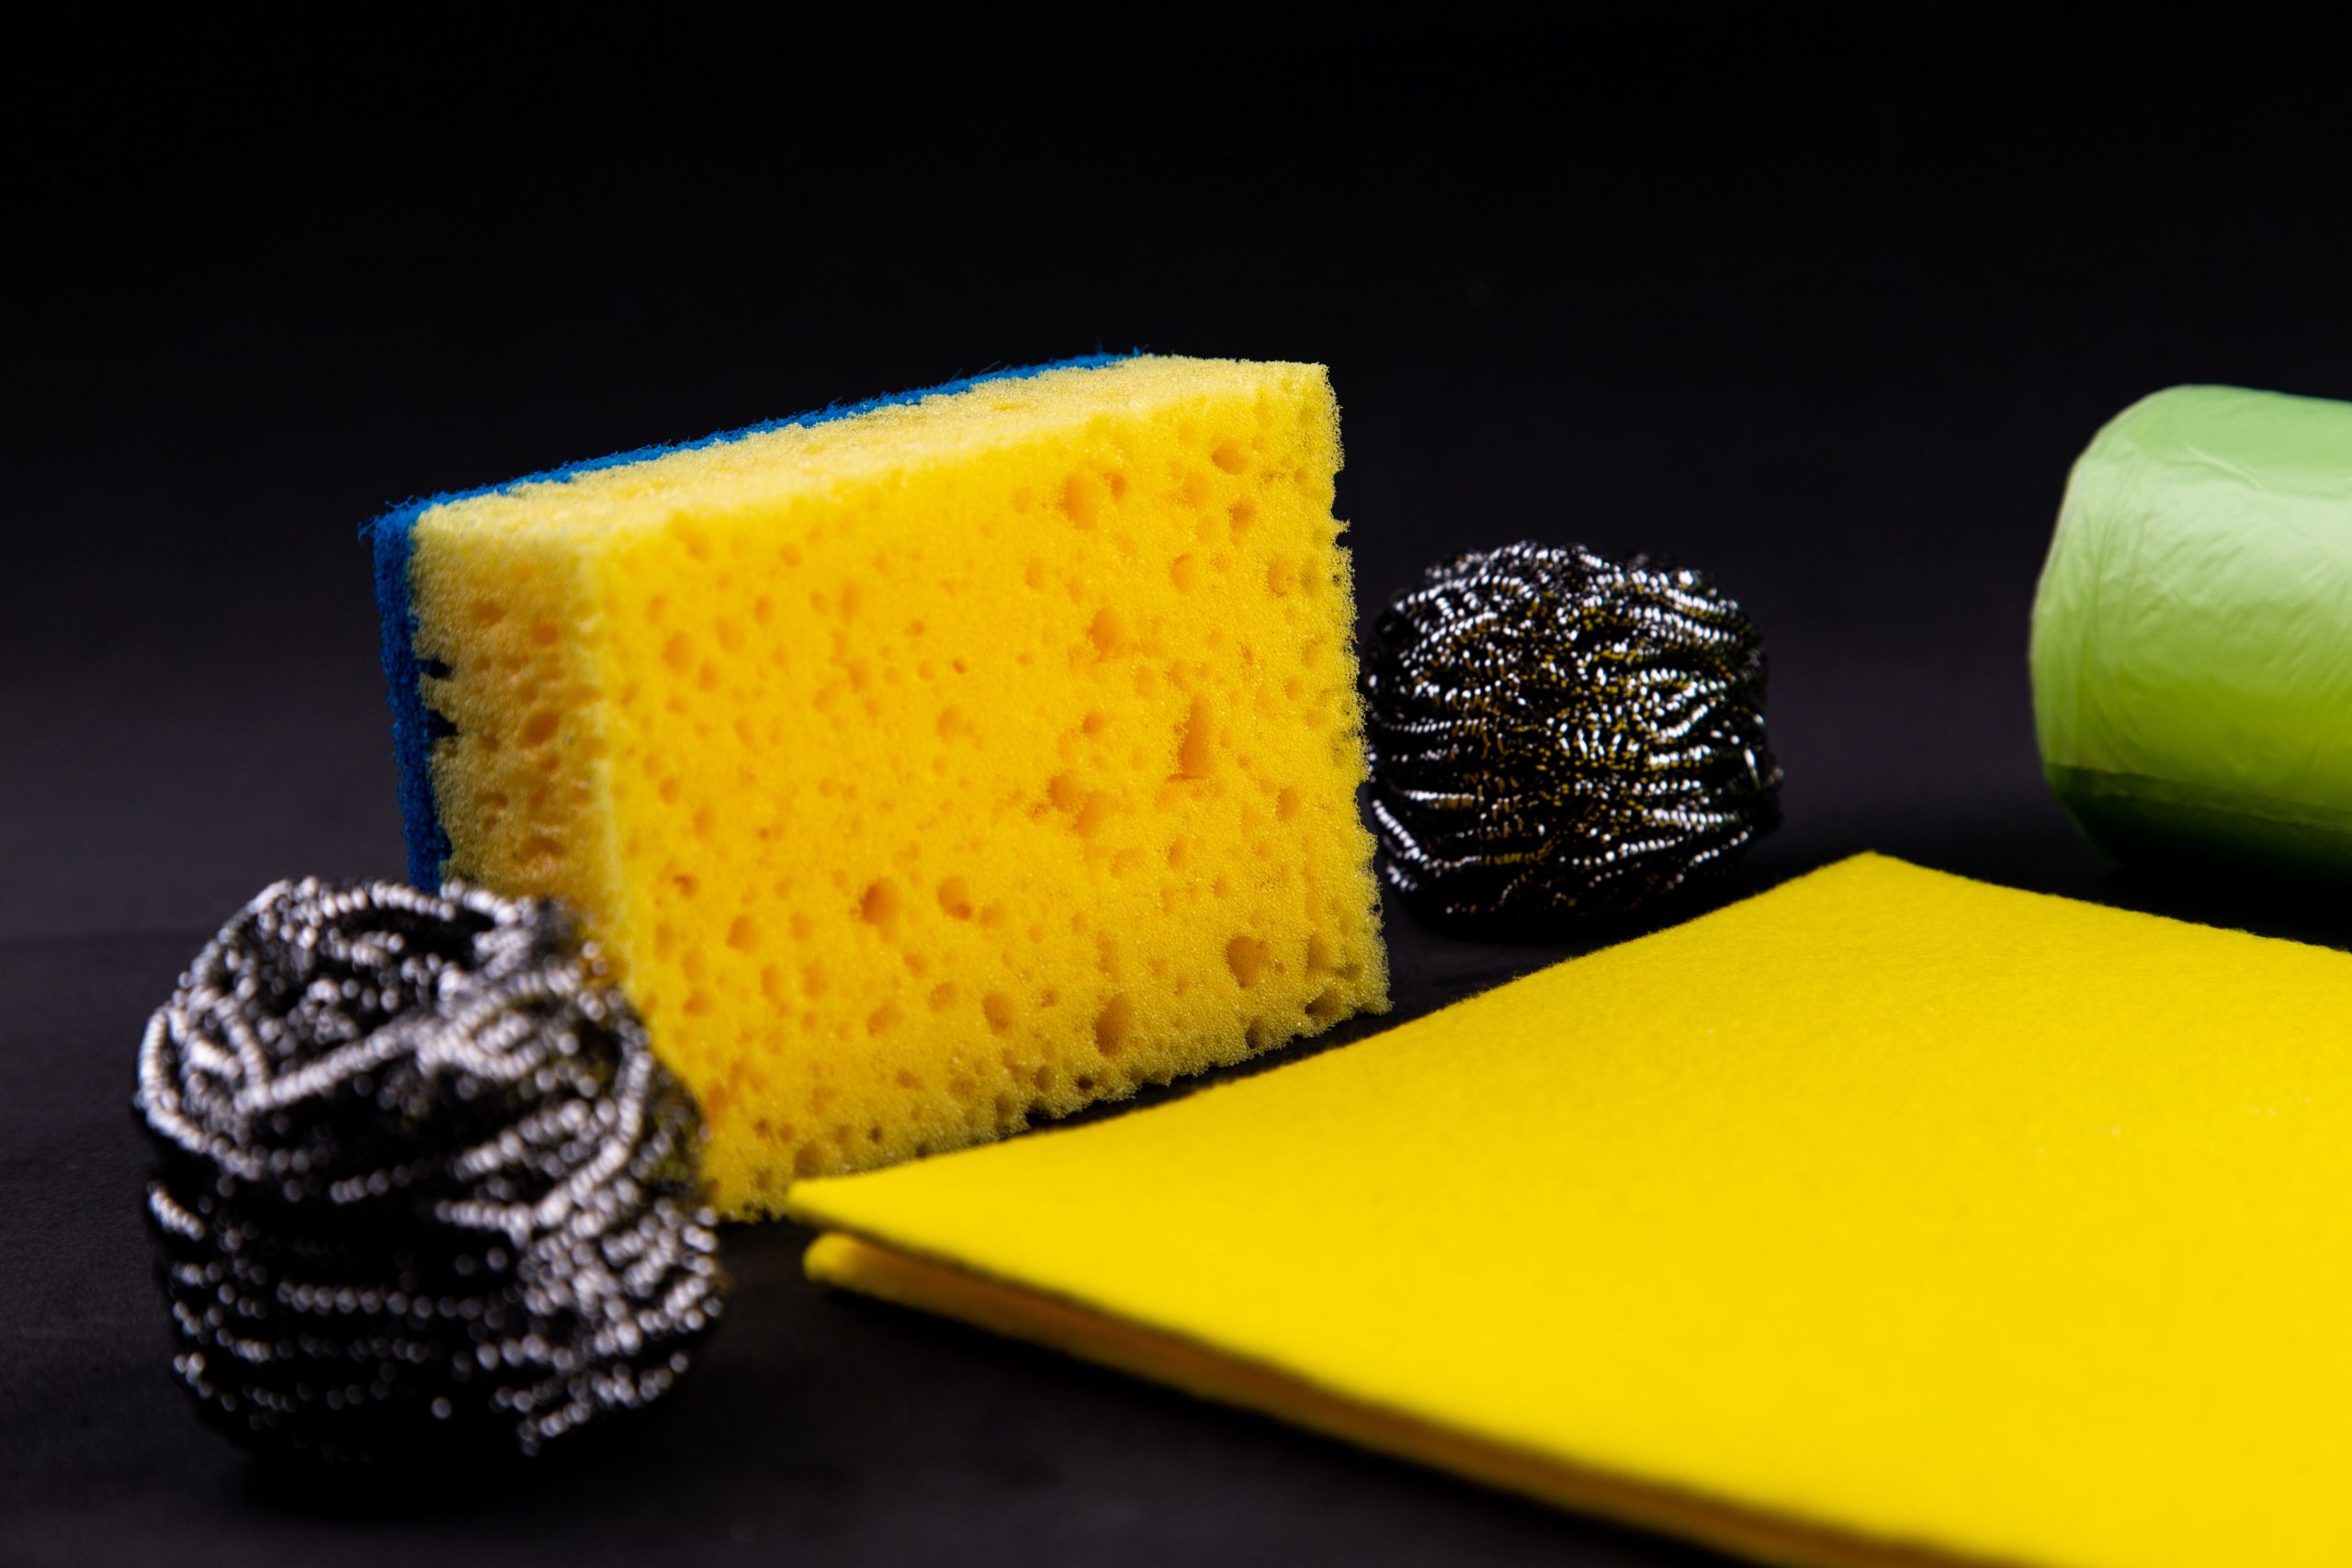 sponges, scourer and cloth on a table